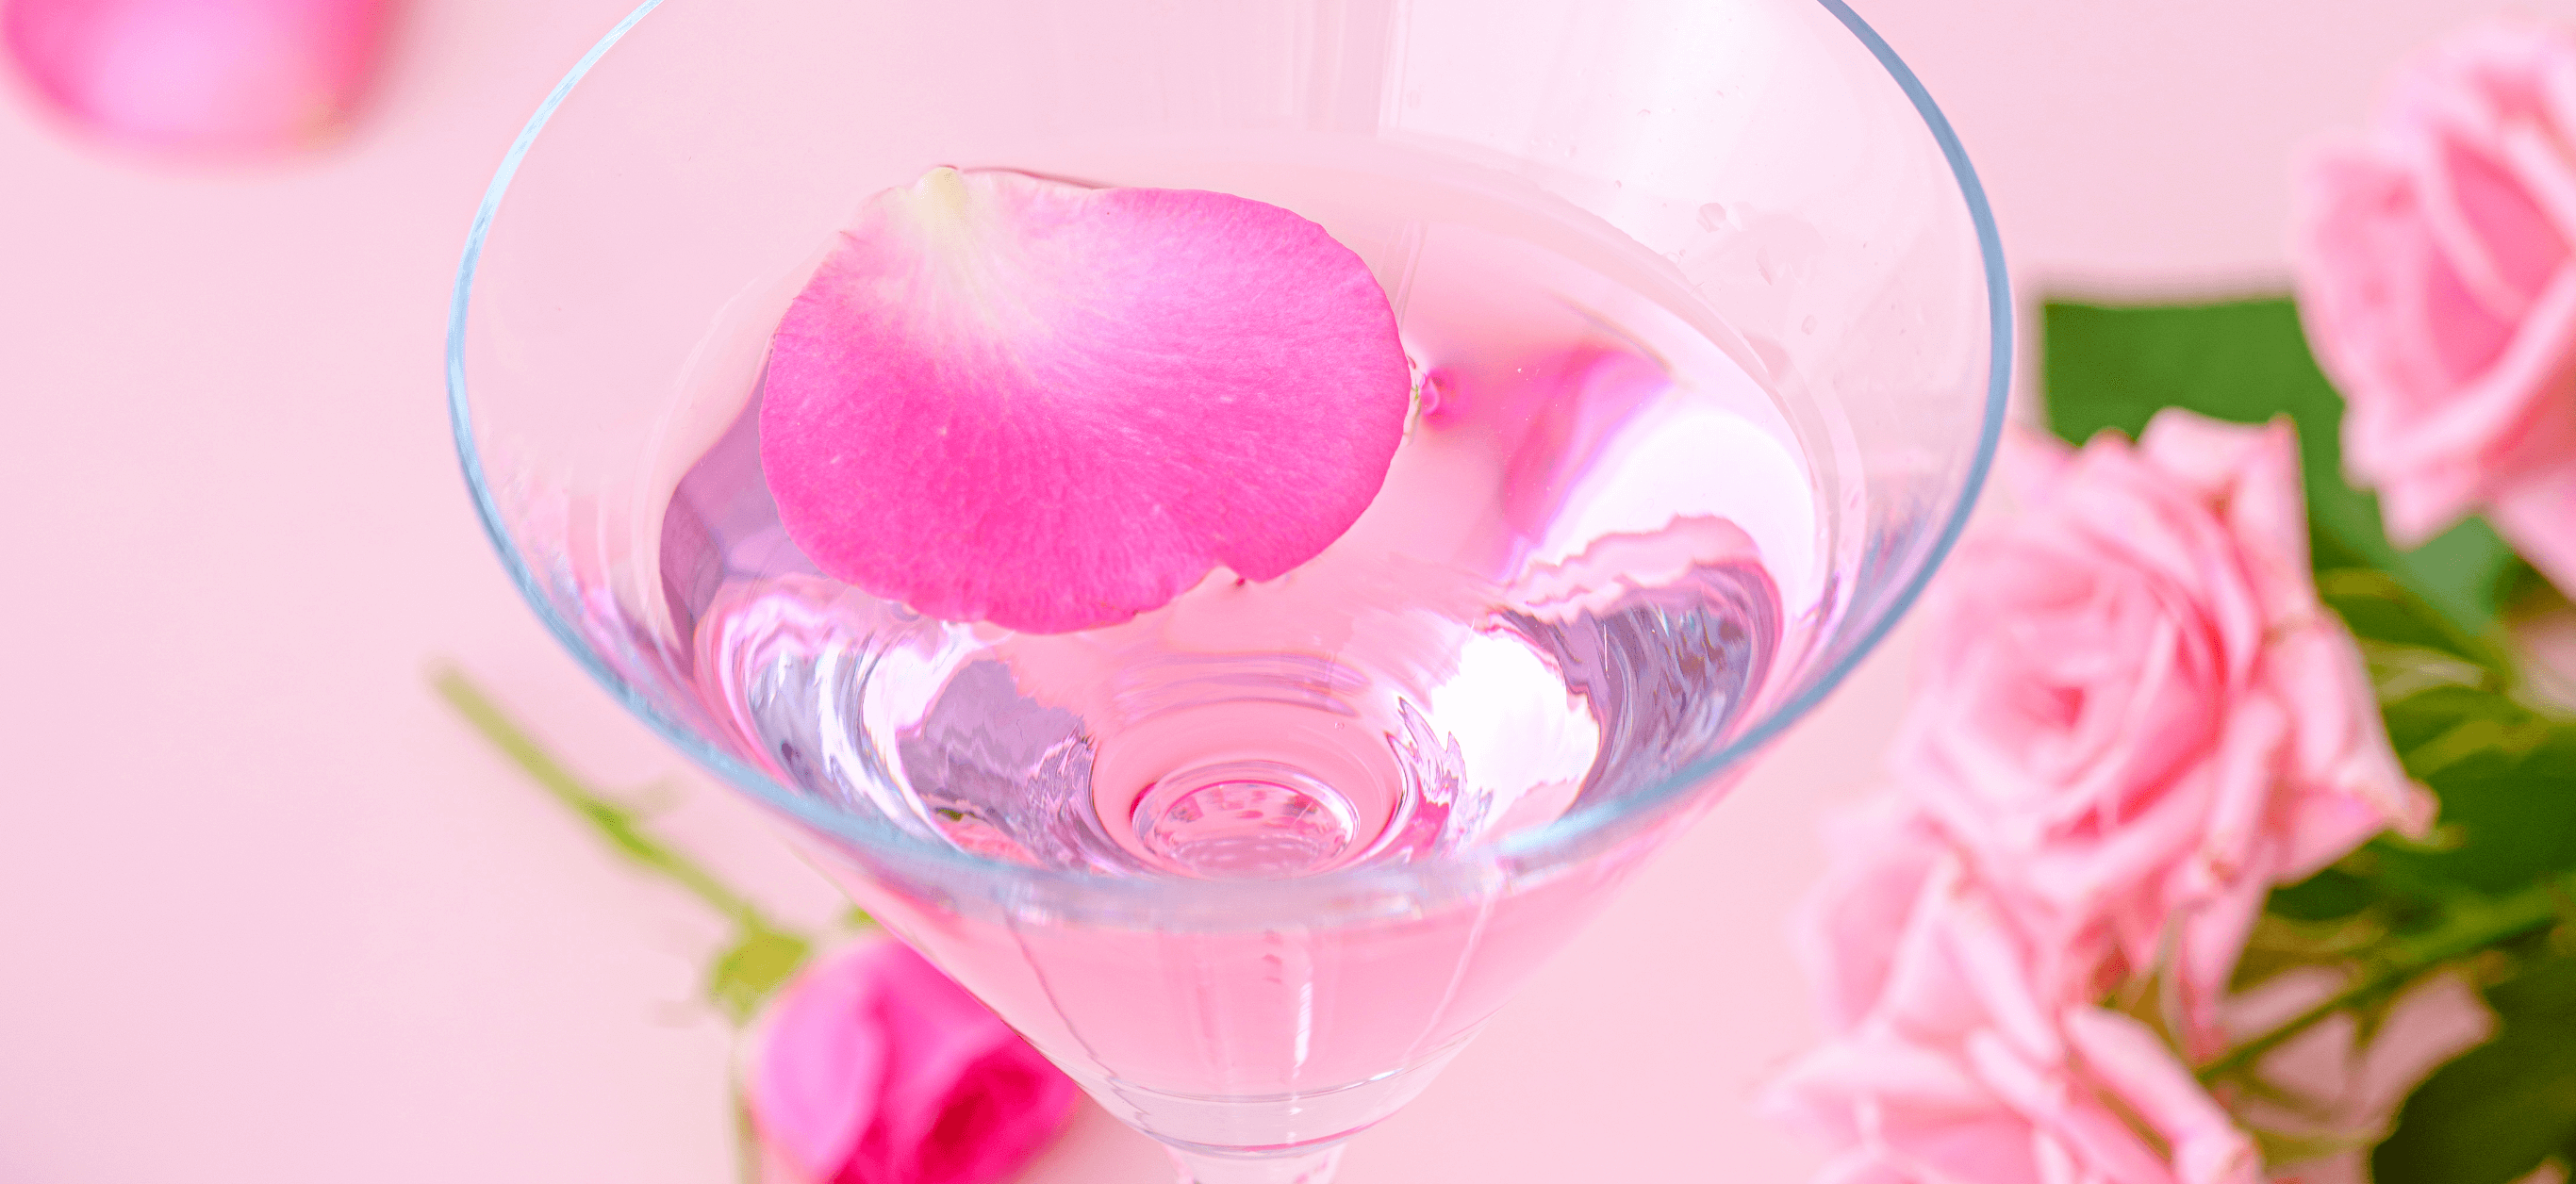 The fragrance and essence of ROSE